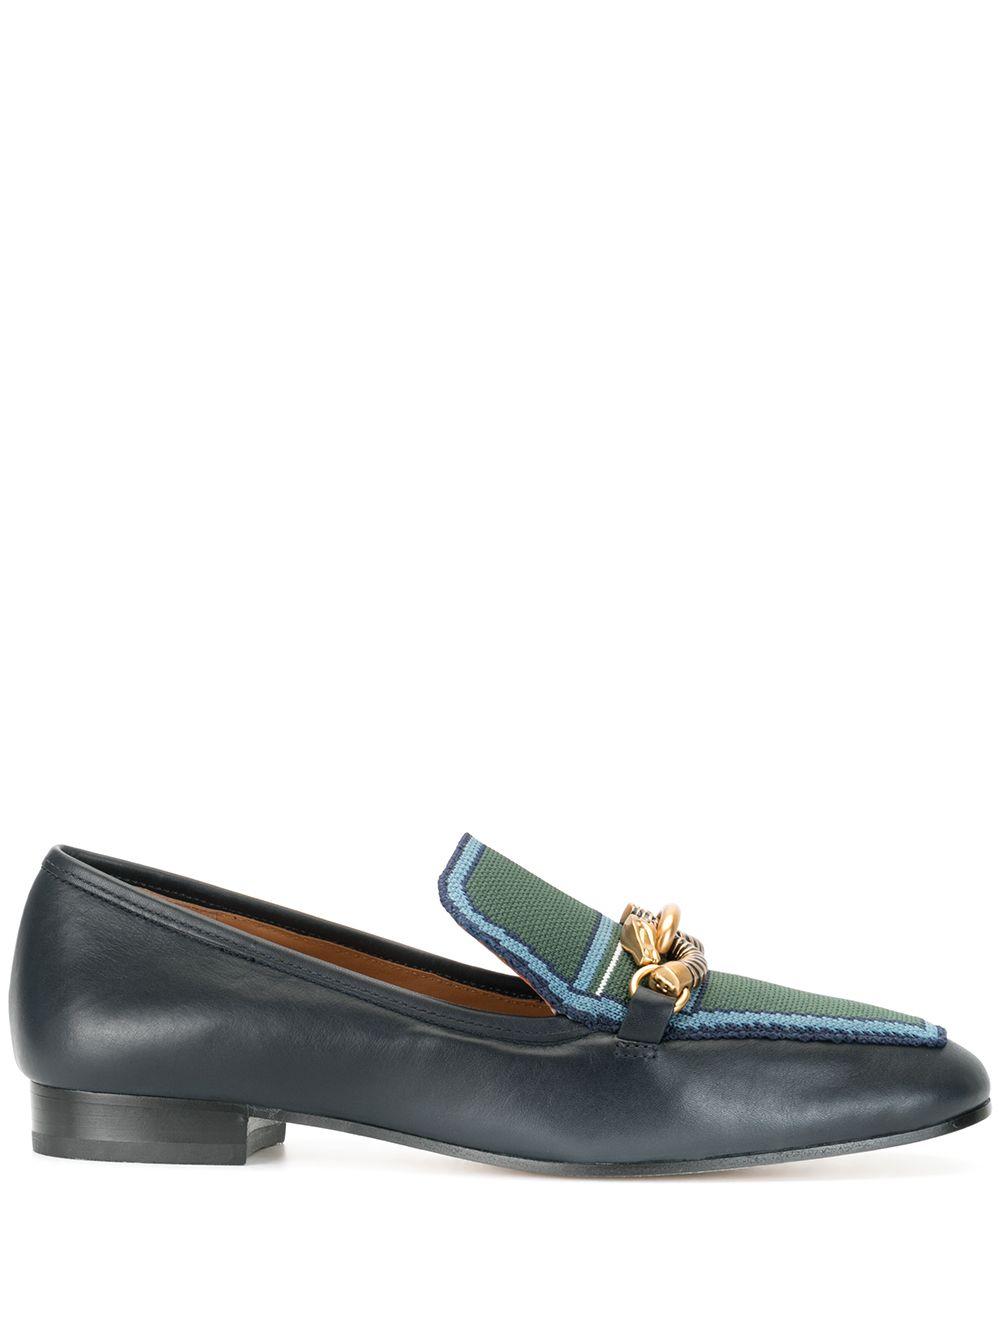 Tory Burch Jessa Leather Loafers in Blue - Save 50% - Lyst